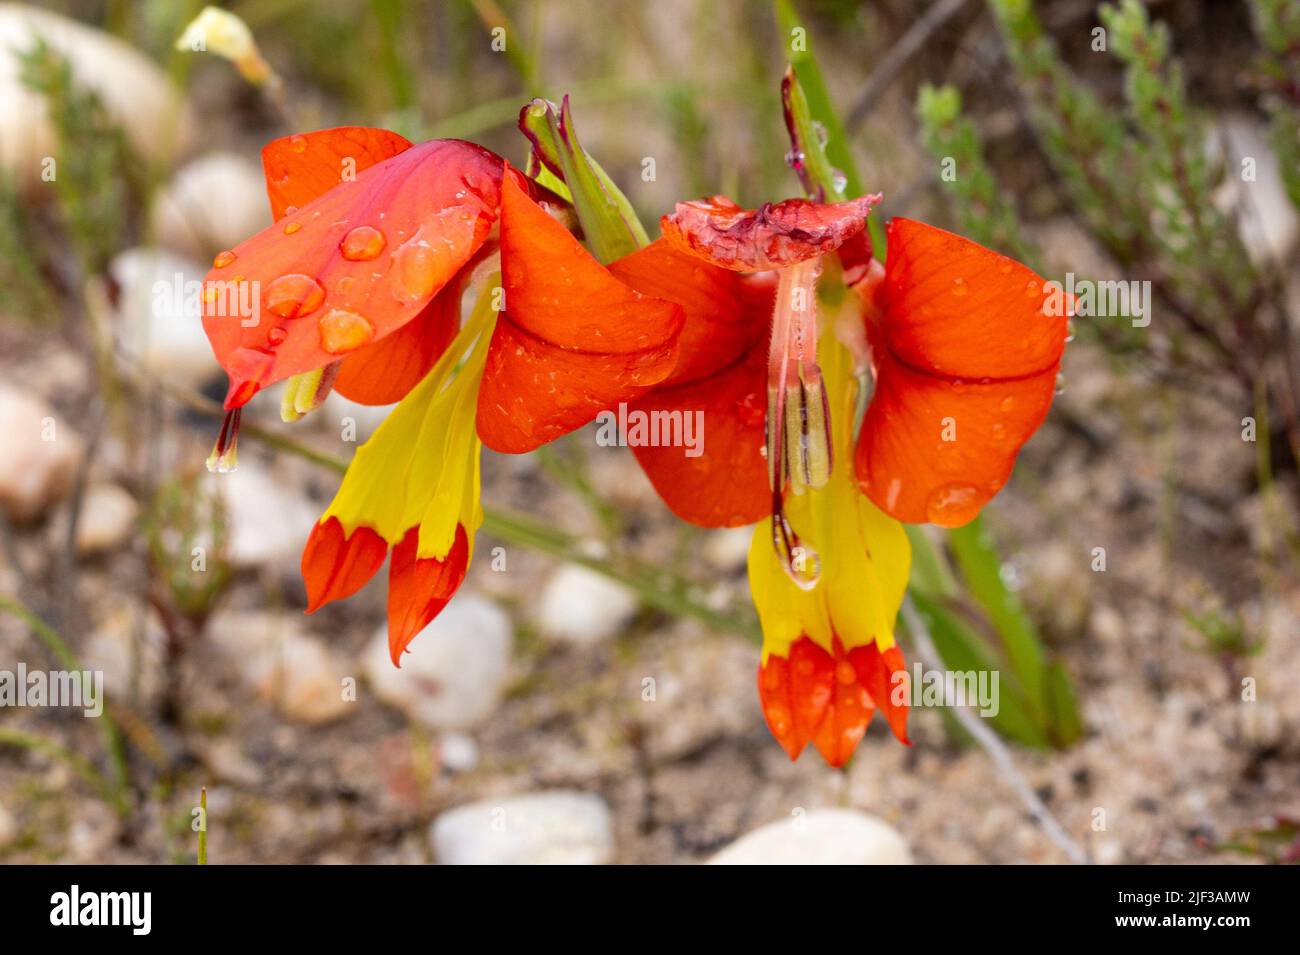 South African Wildflower: Two orange yellow flowers of Gladiolus alatus near Nieuwoudtville in the Western Cape of South Africa Stock Photo